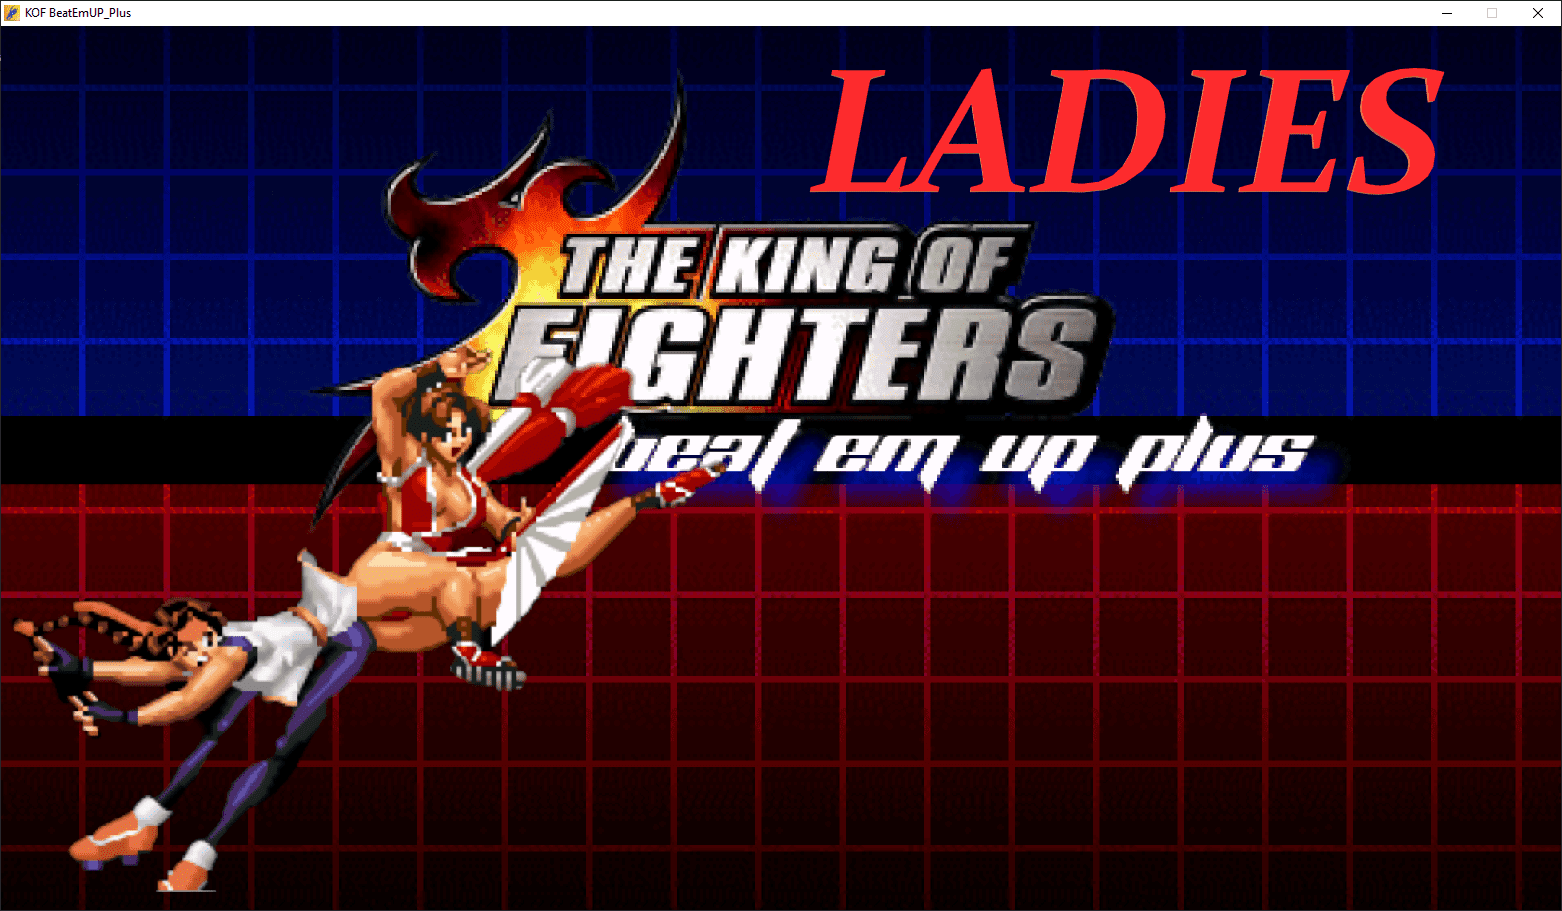 The King of Fighters Beat 'em Up Ladies